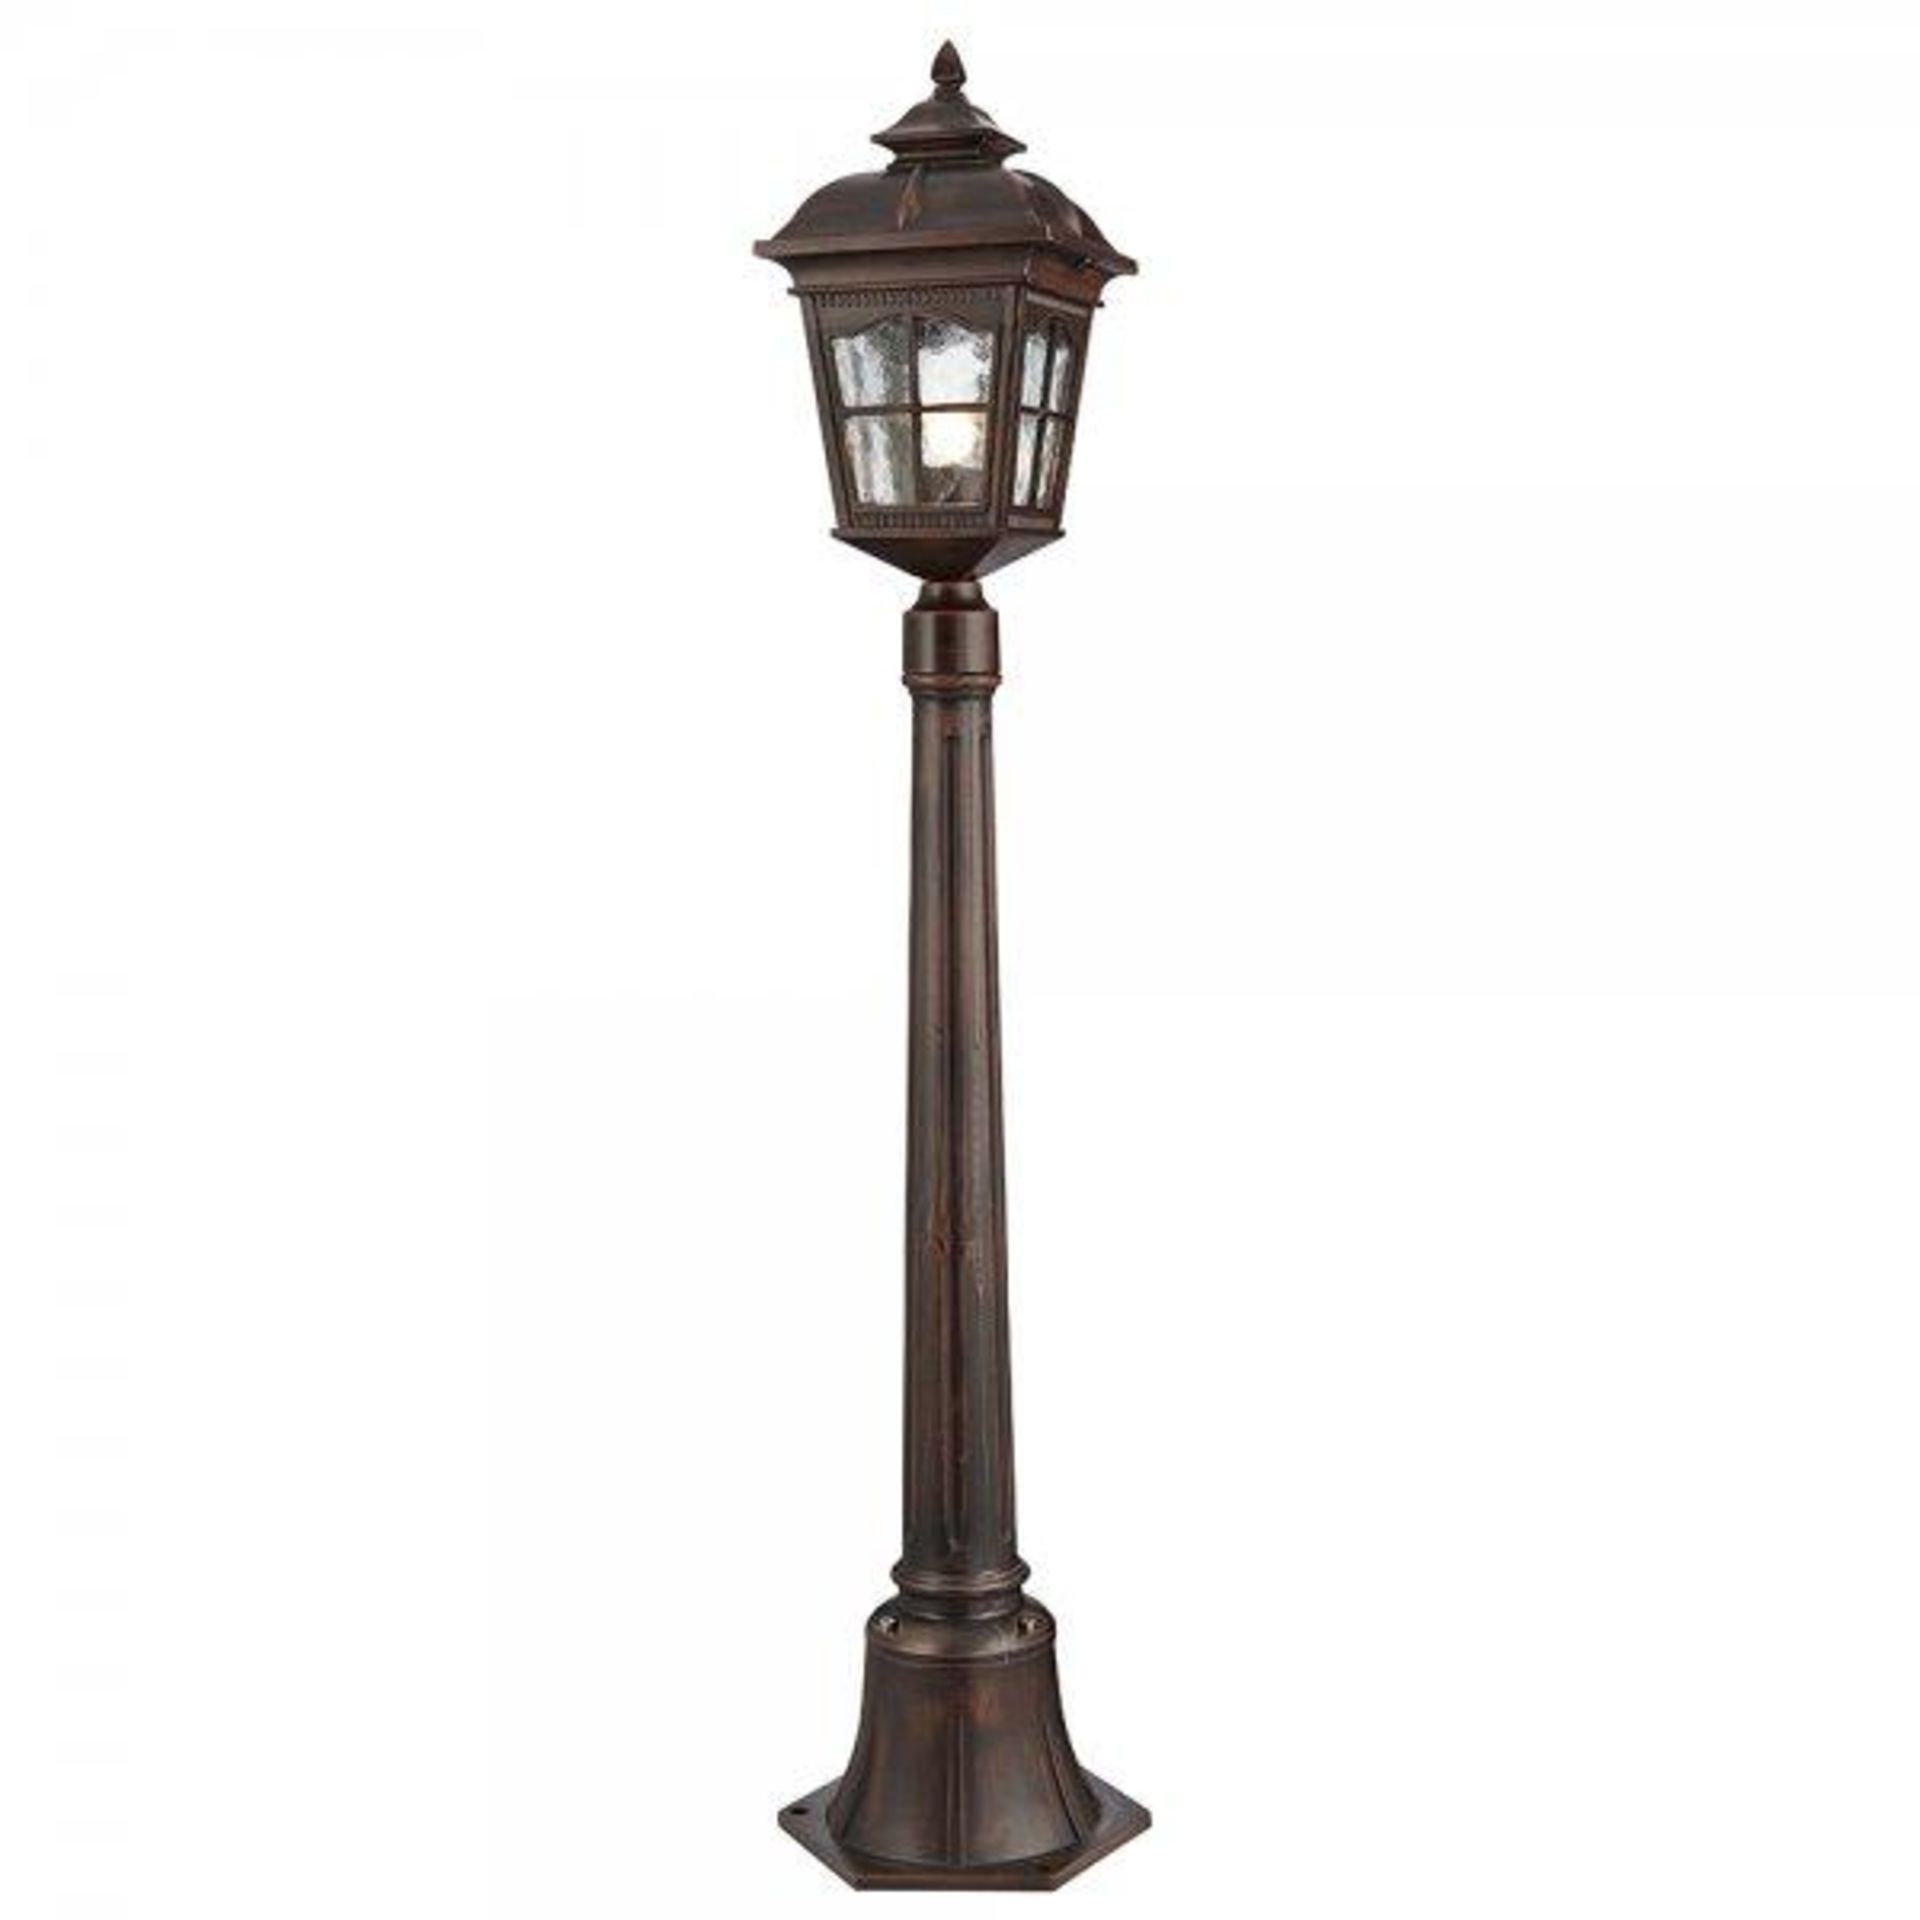 1 x Pompeii Brown Stone Aluminium IP44 Outdoor Post Light - 108cm Height - New Boxed Stock - CL323 - - Image 2 of 4